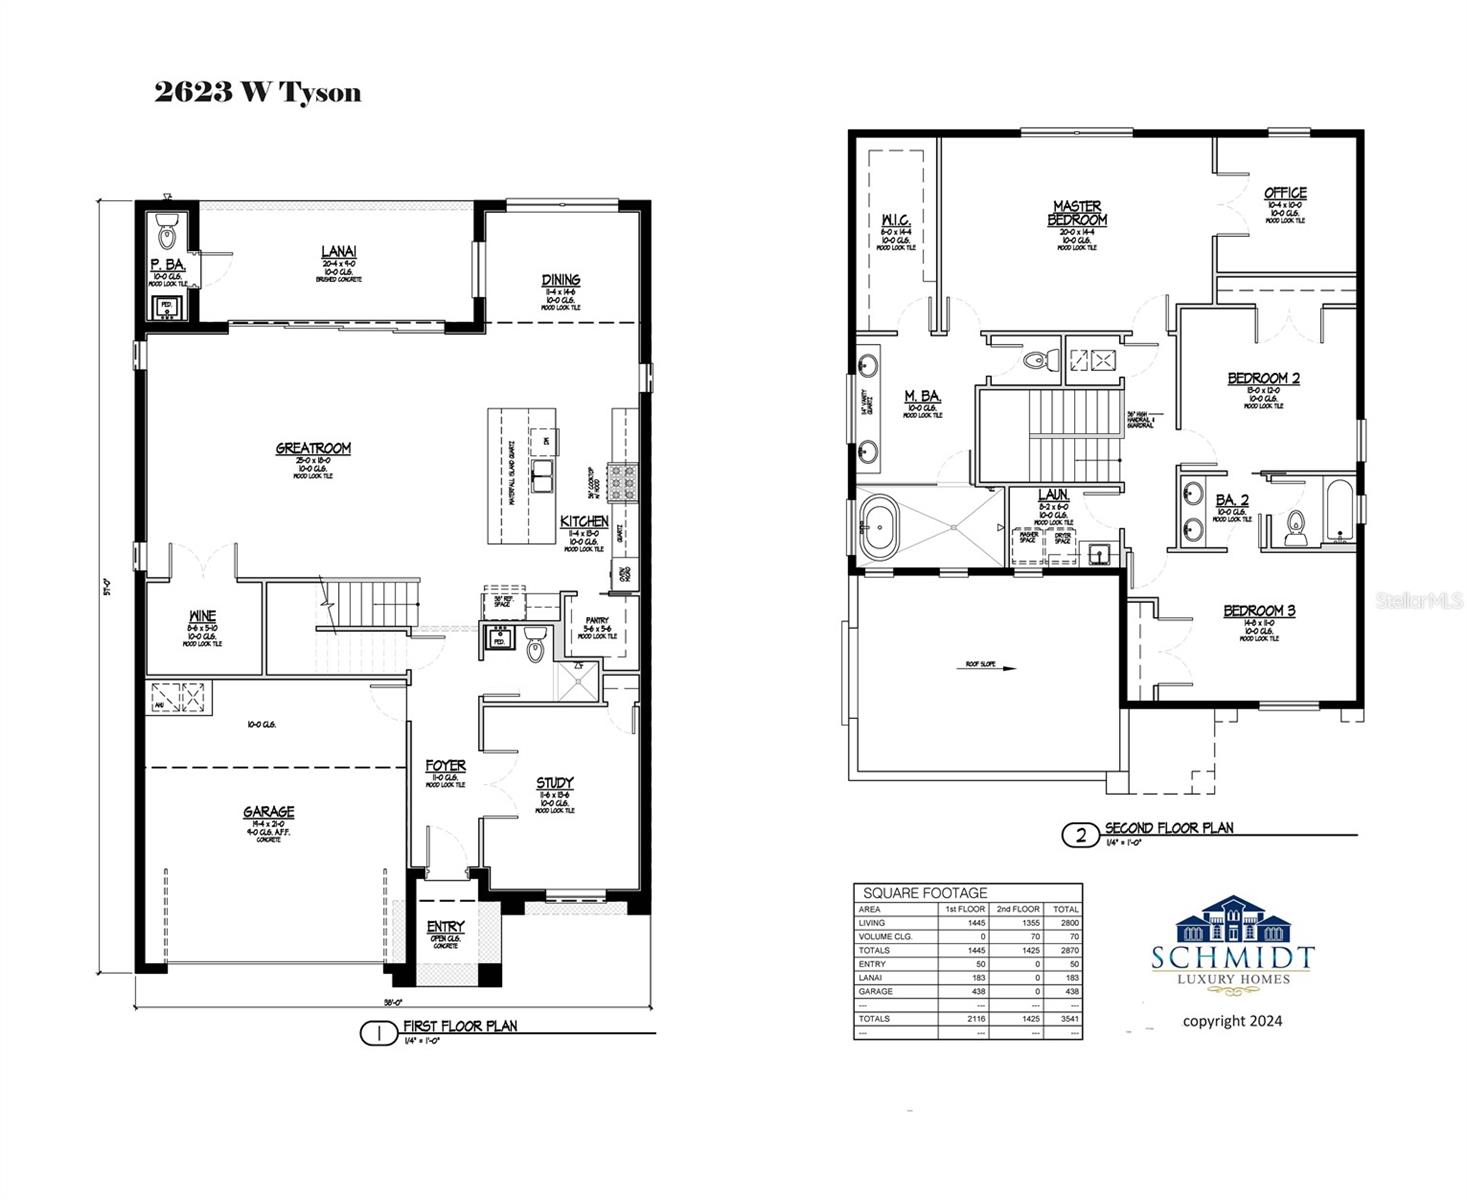 floor plan- to be built home